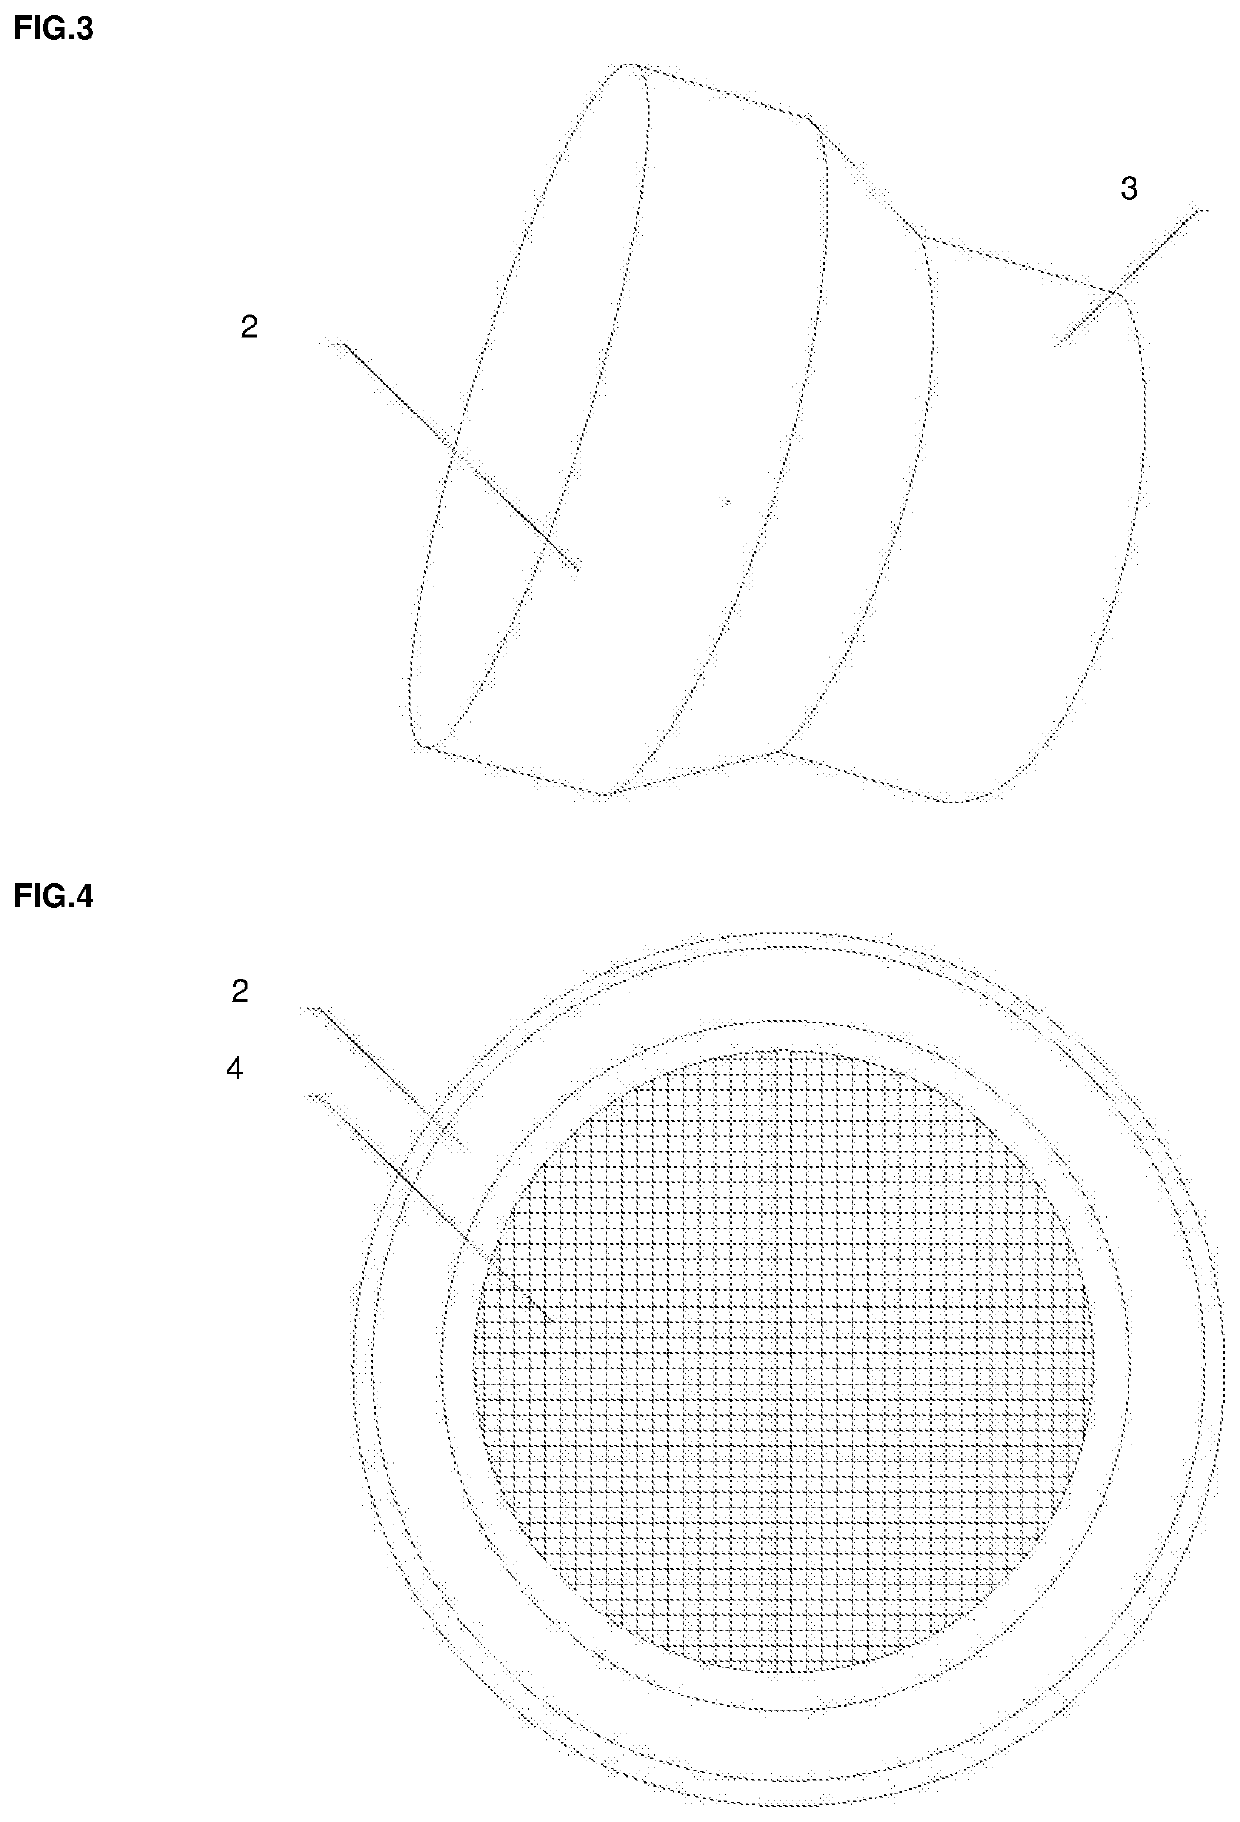 Constructive arrangement applied in air diffuser for combustion engines